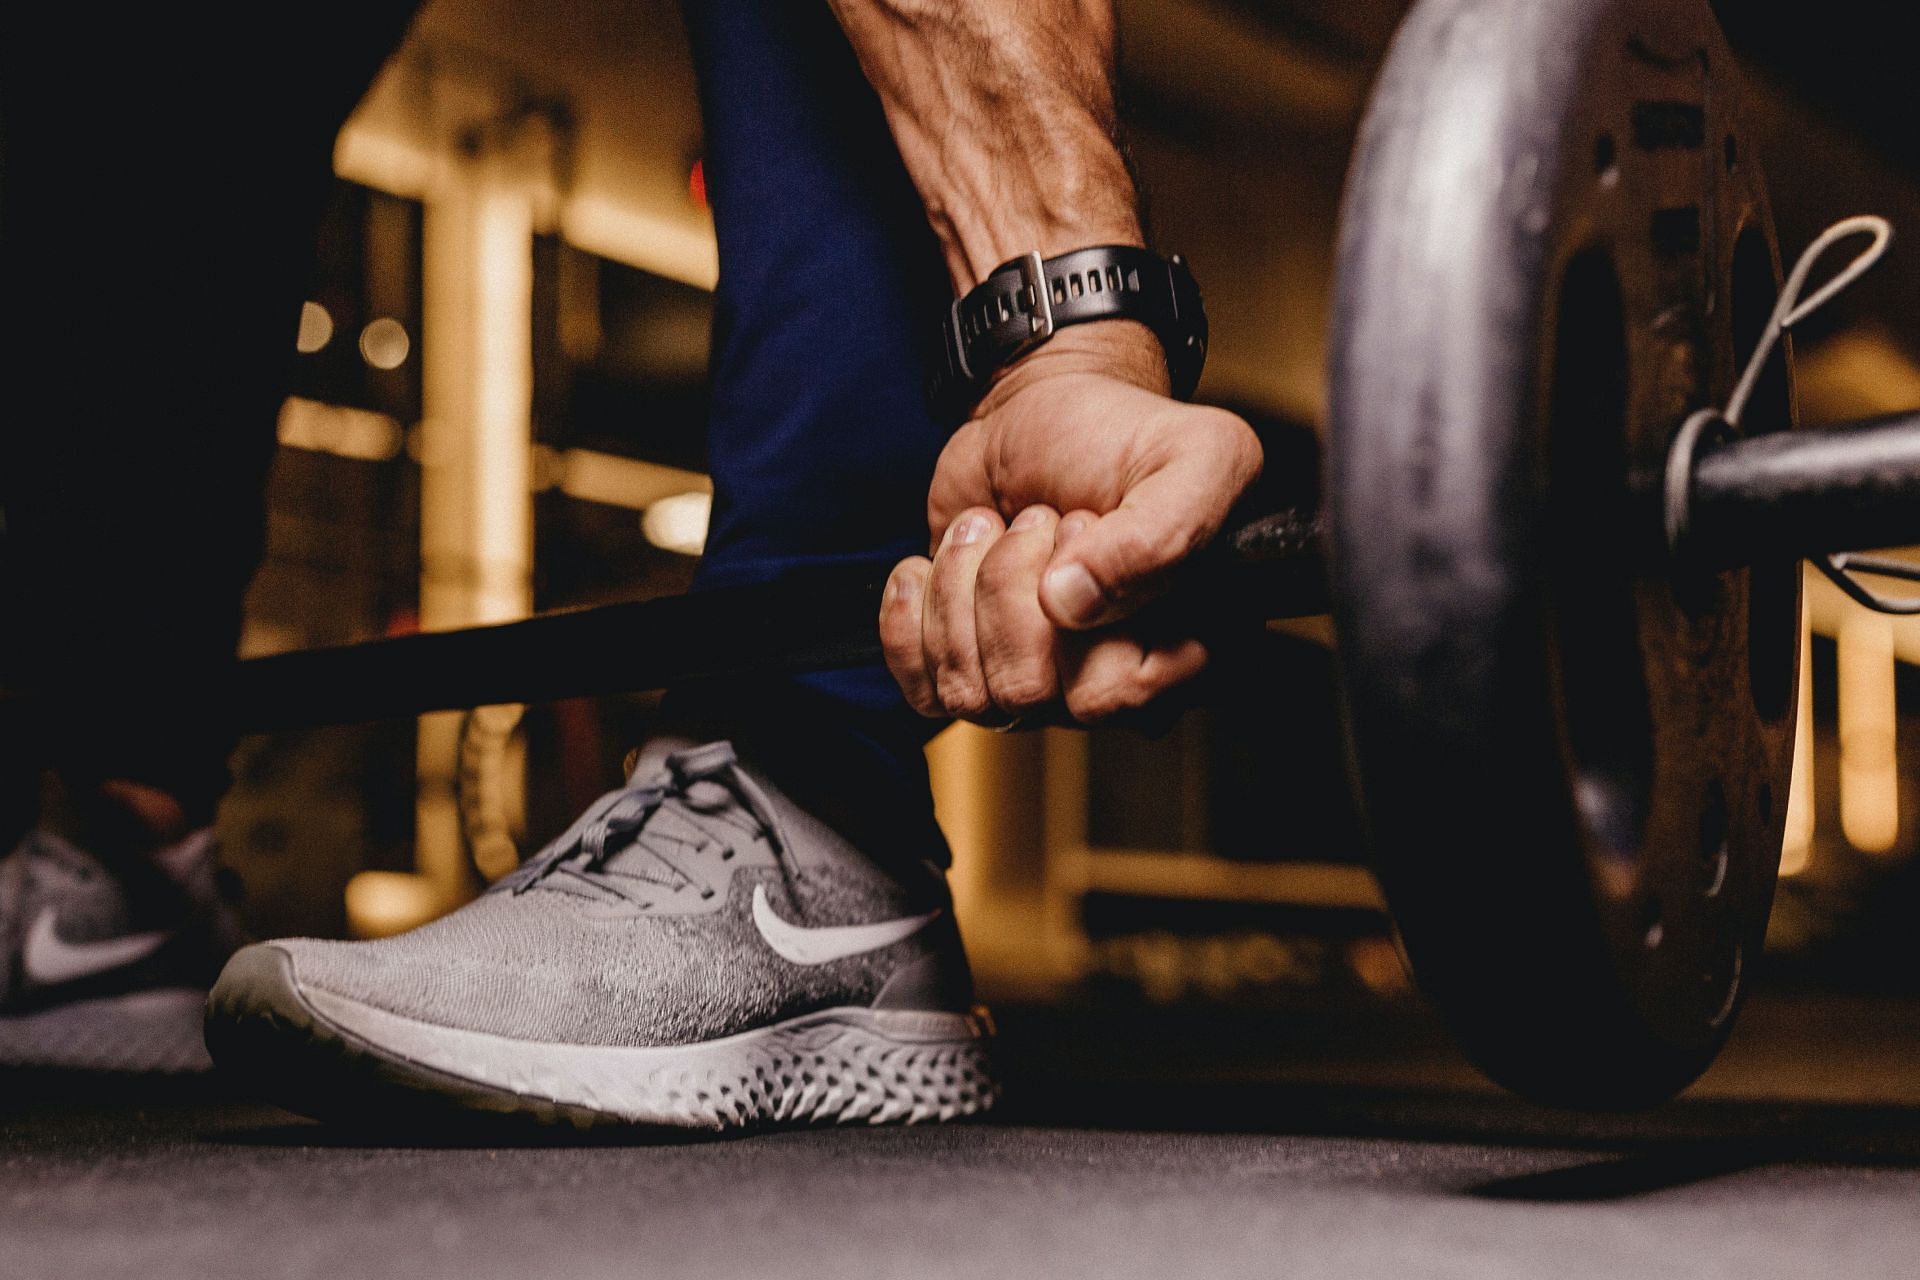 Beginners should try these wrist exercises to build their lower arm strength (Image via Unsplash/Jonathan Borba)